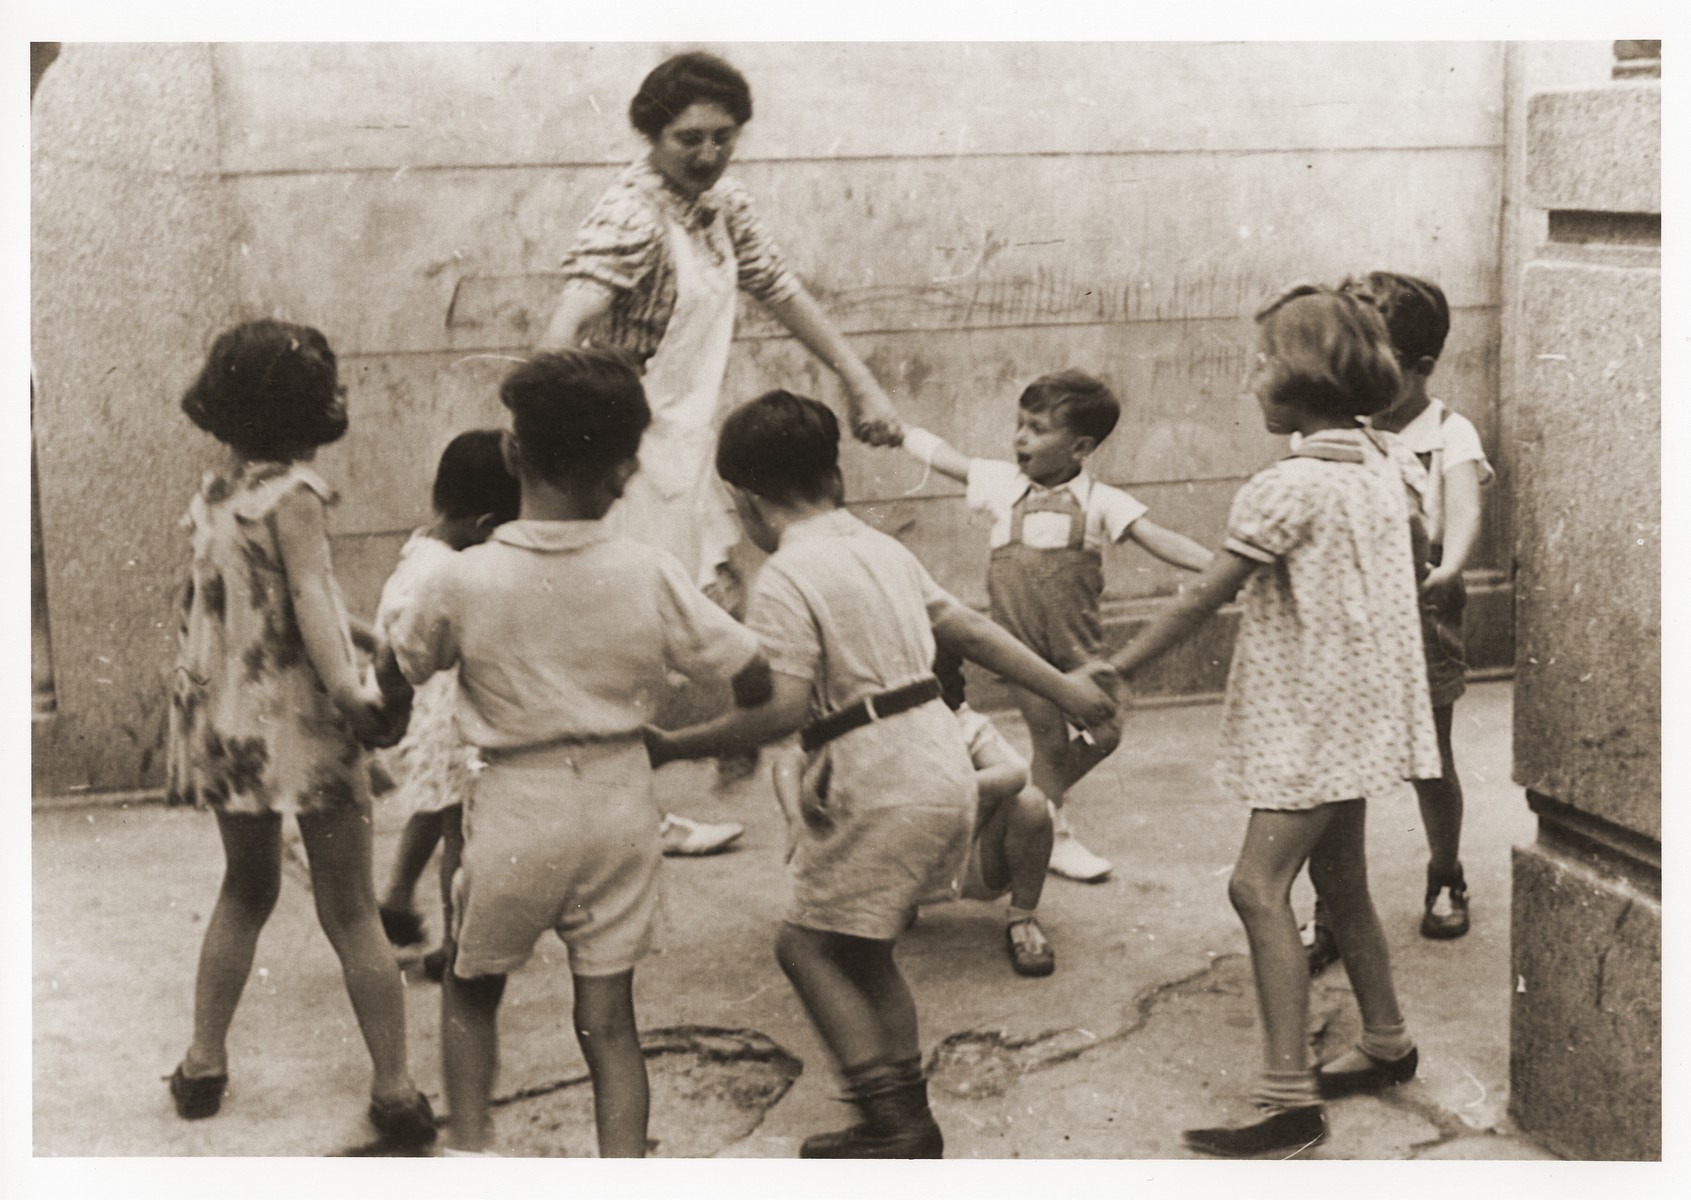 A teacher leads a group of young children in a circle dance at the Shanghai Jewish Youth Association School.

Among those pictured is Wolfgang Gotthelf (far right, partially hidden from view).  His aunt is the teacher.